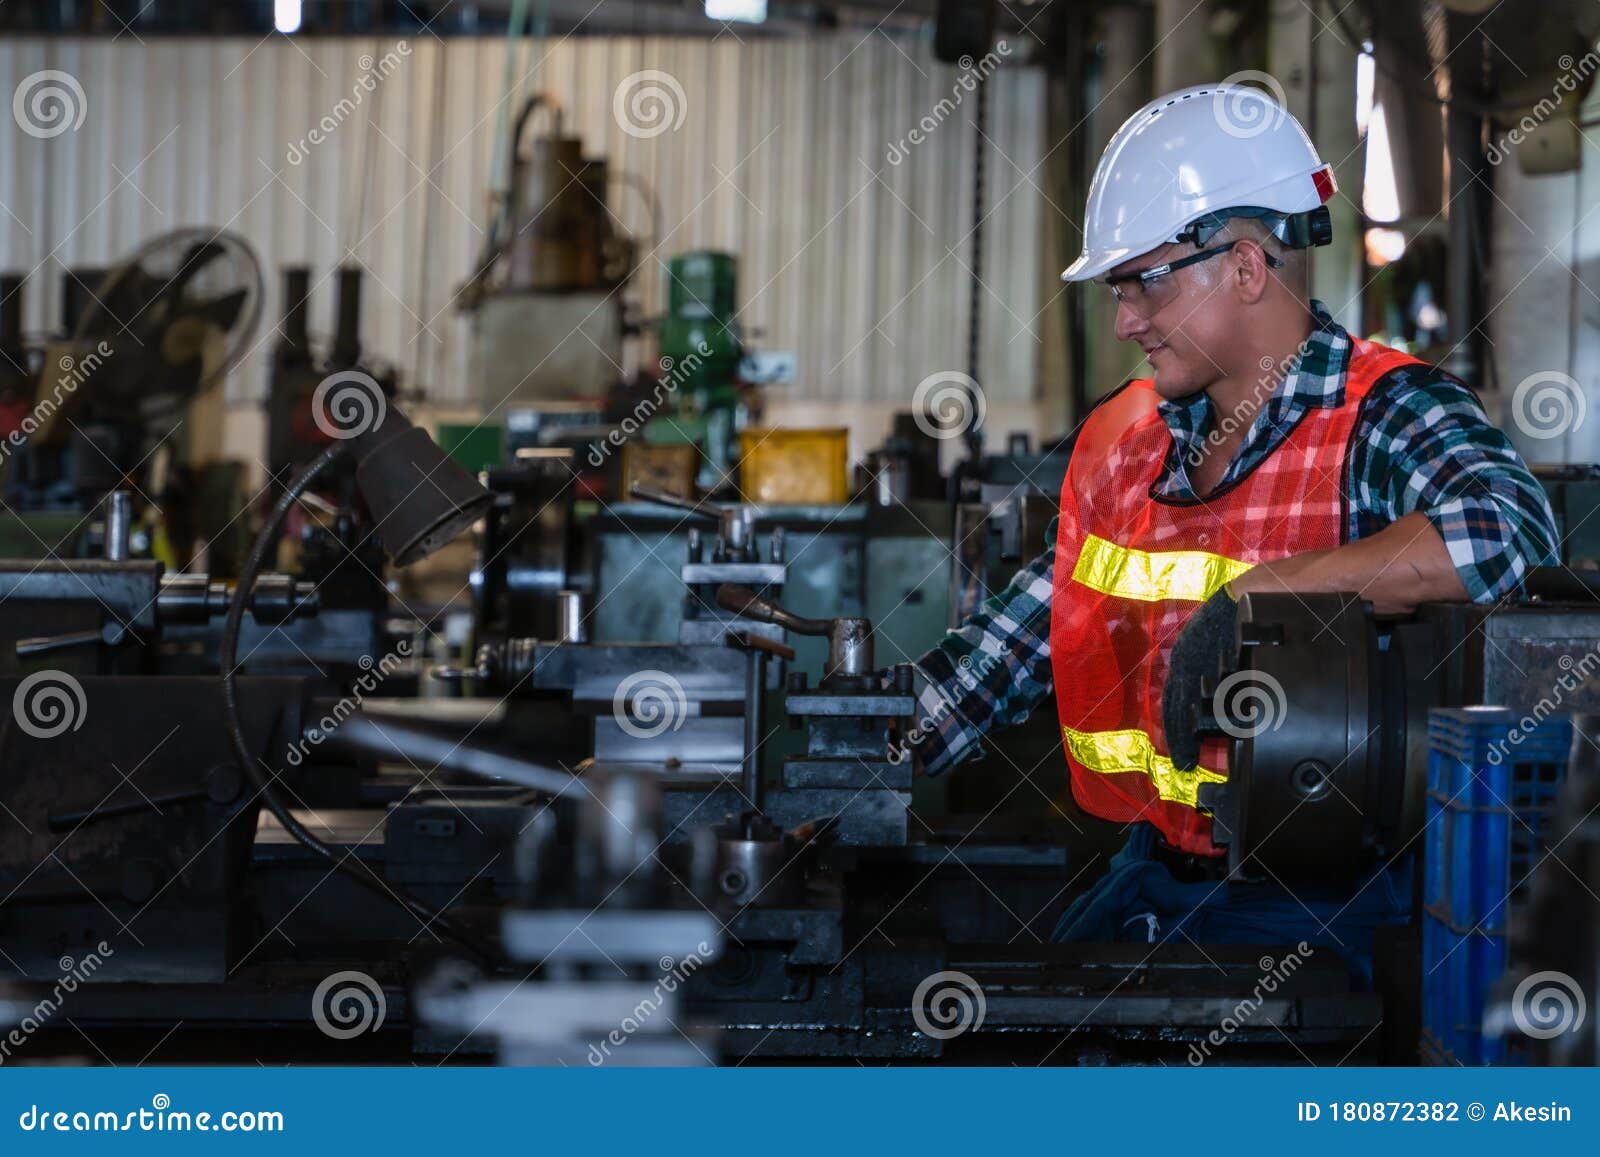 industrial background of caucasian mechanic engineer with lathe machine in metal work and machine part manufacturer workshop and